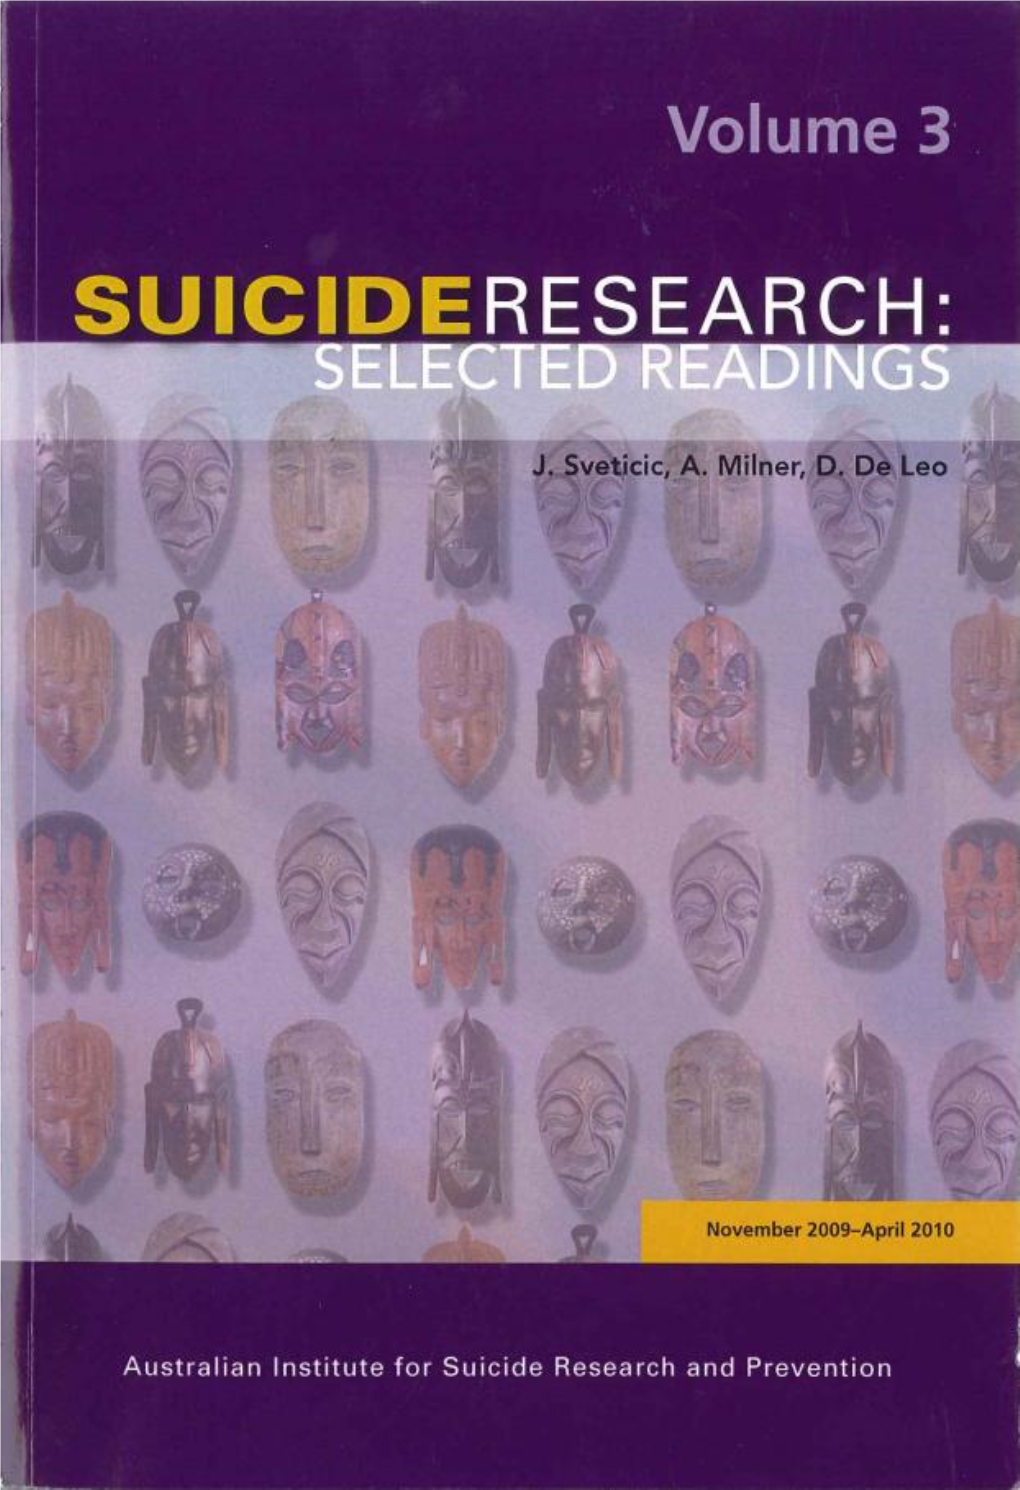 SUICIDE RESEARCH: SELECTED READINGS Volume 3 November 2009–April 2010